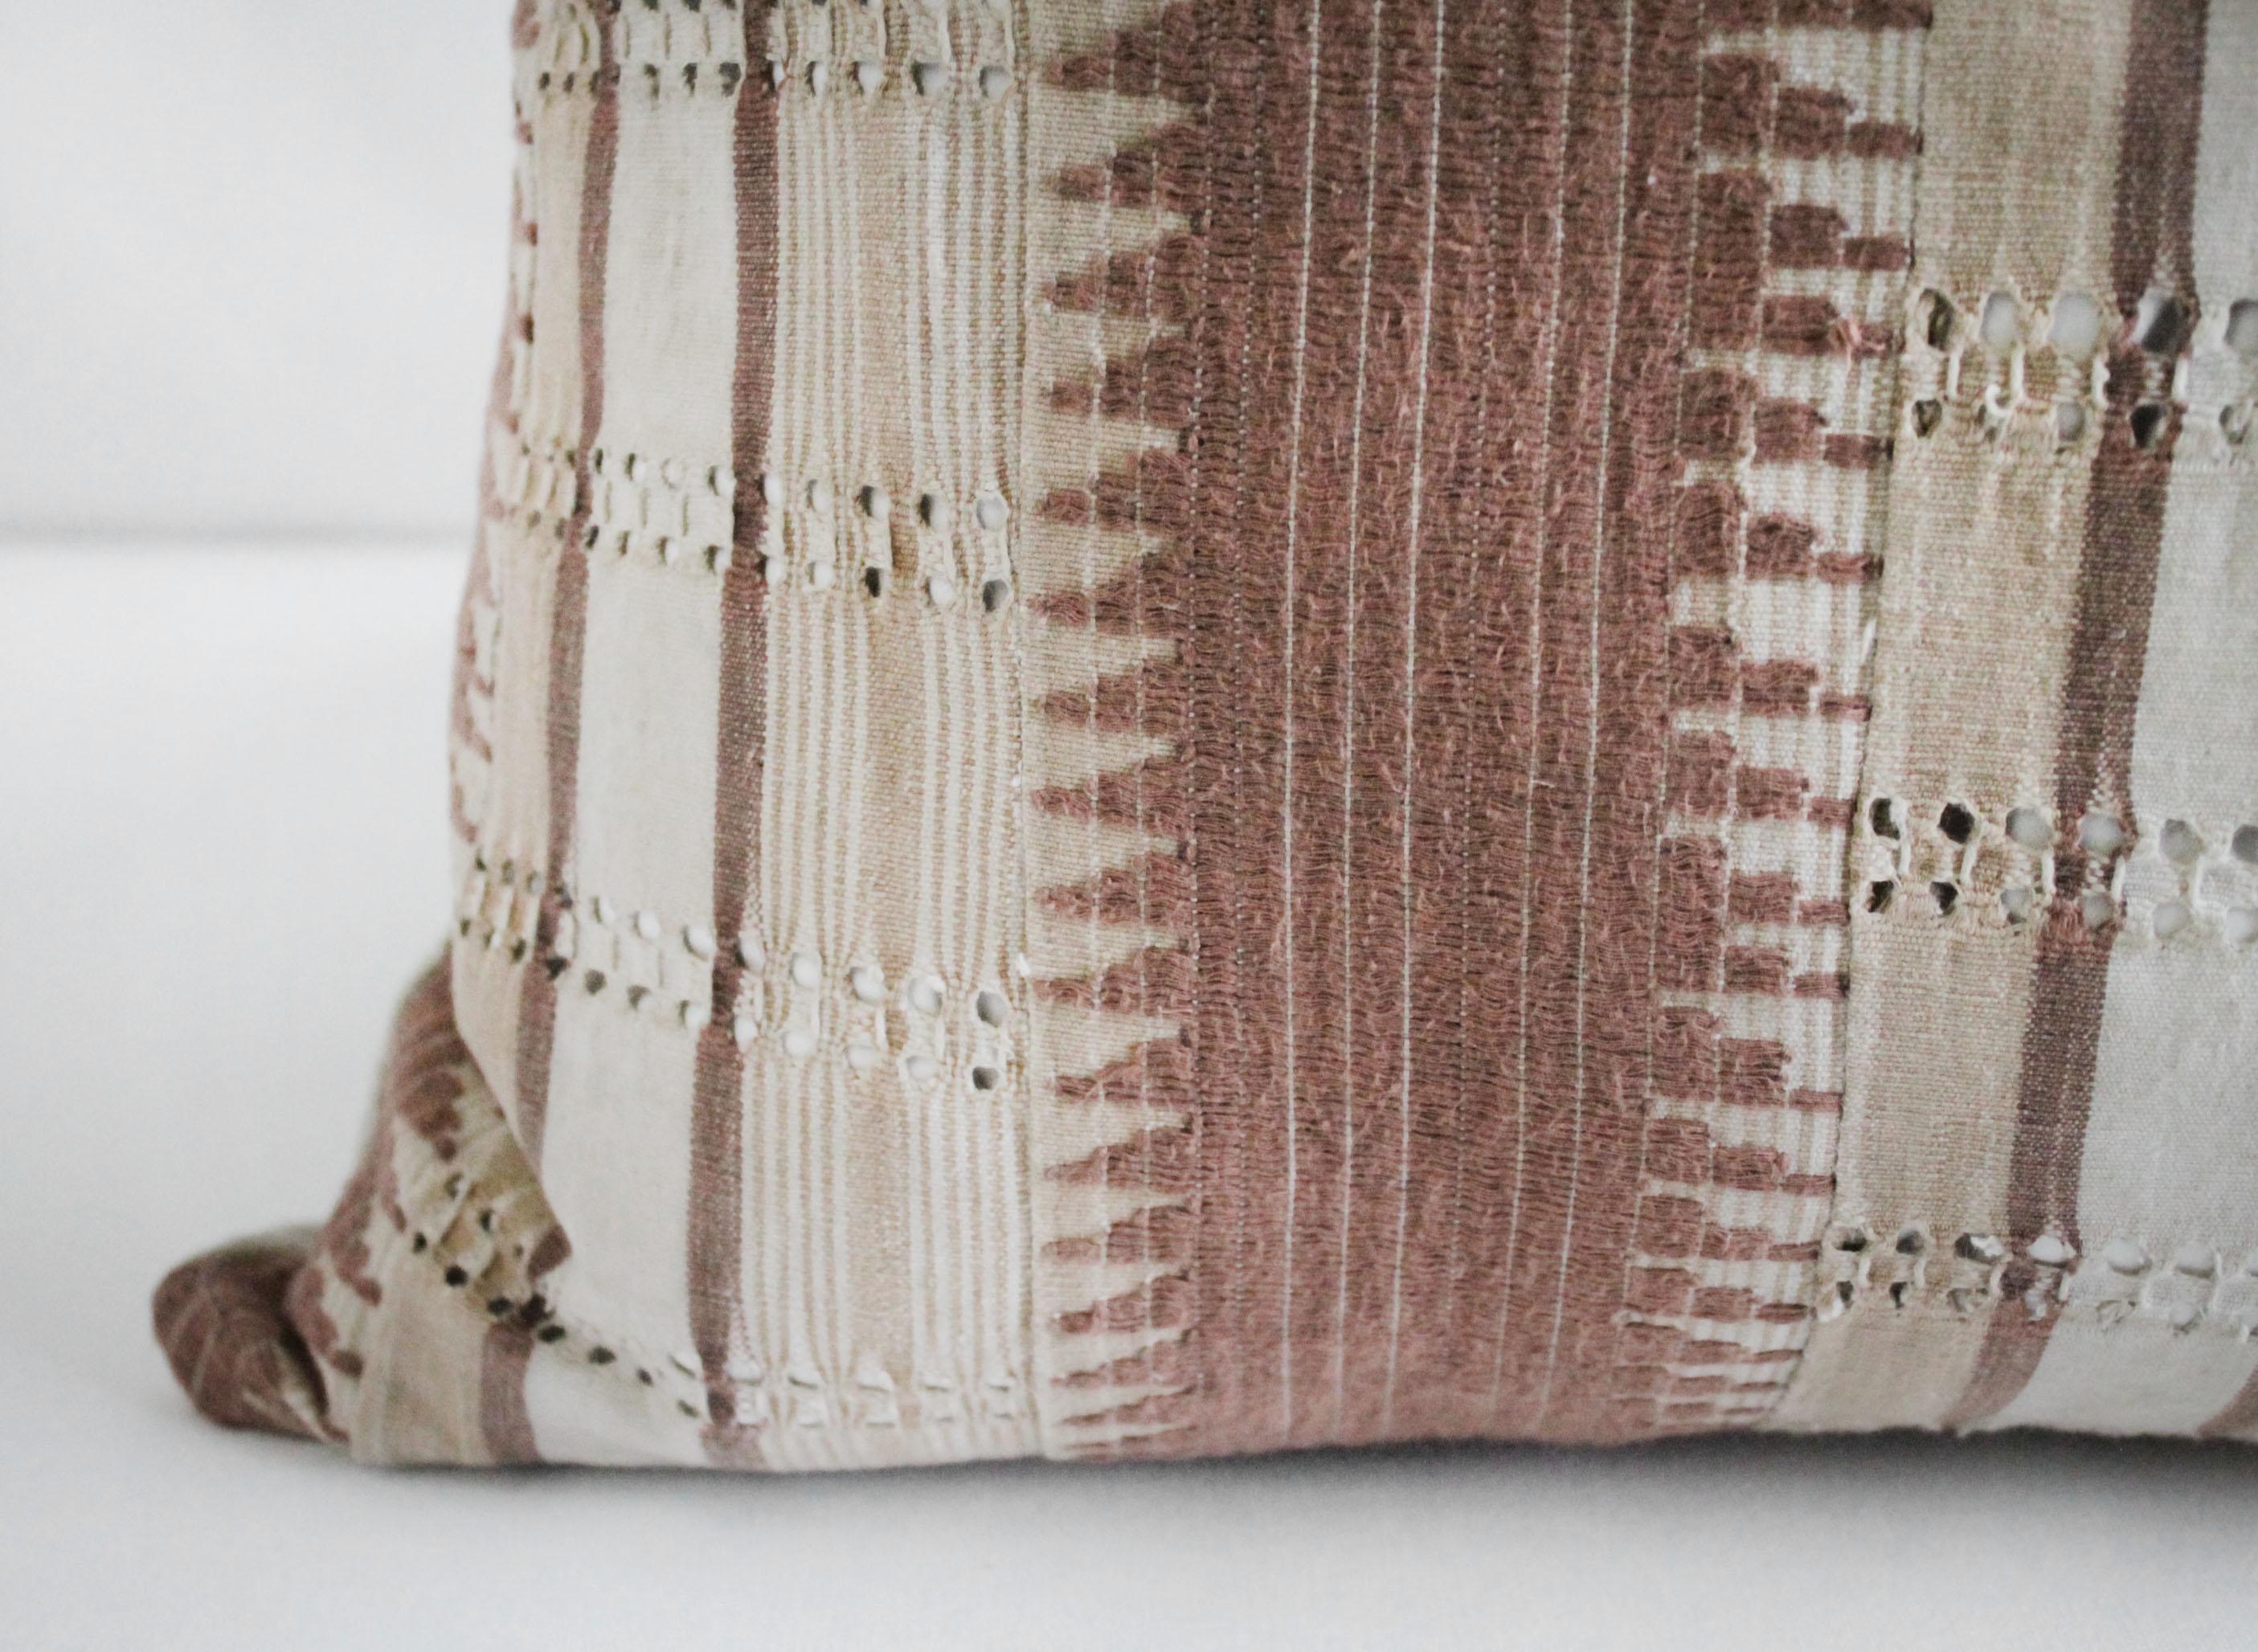 Vintage handmade tribal block linen lumbar pillow in blush mauve tones
The face in a full piece of antique tribal stripe and zig zag pattern in natural, cream, and dusty rose mauve tones.
The backside is 100% pure softened Irish linens. Our